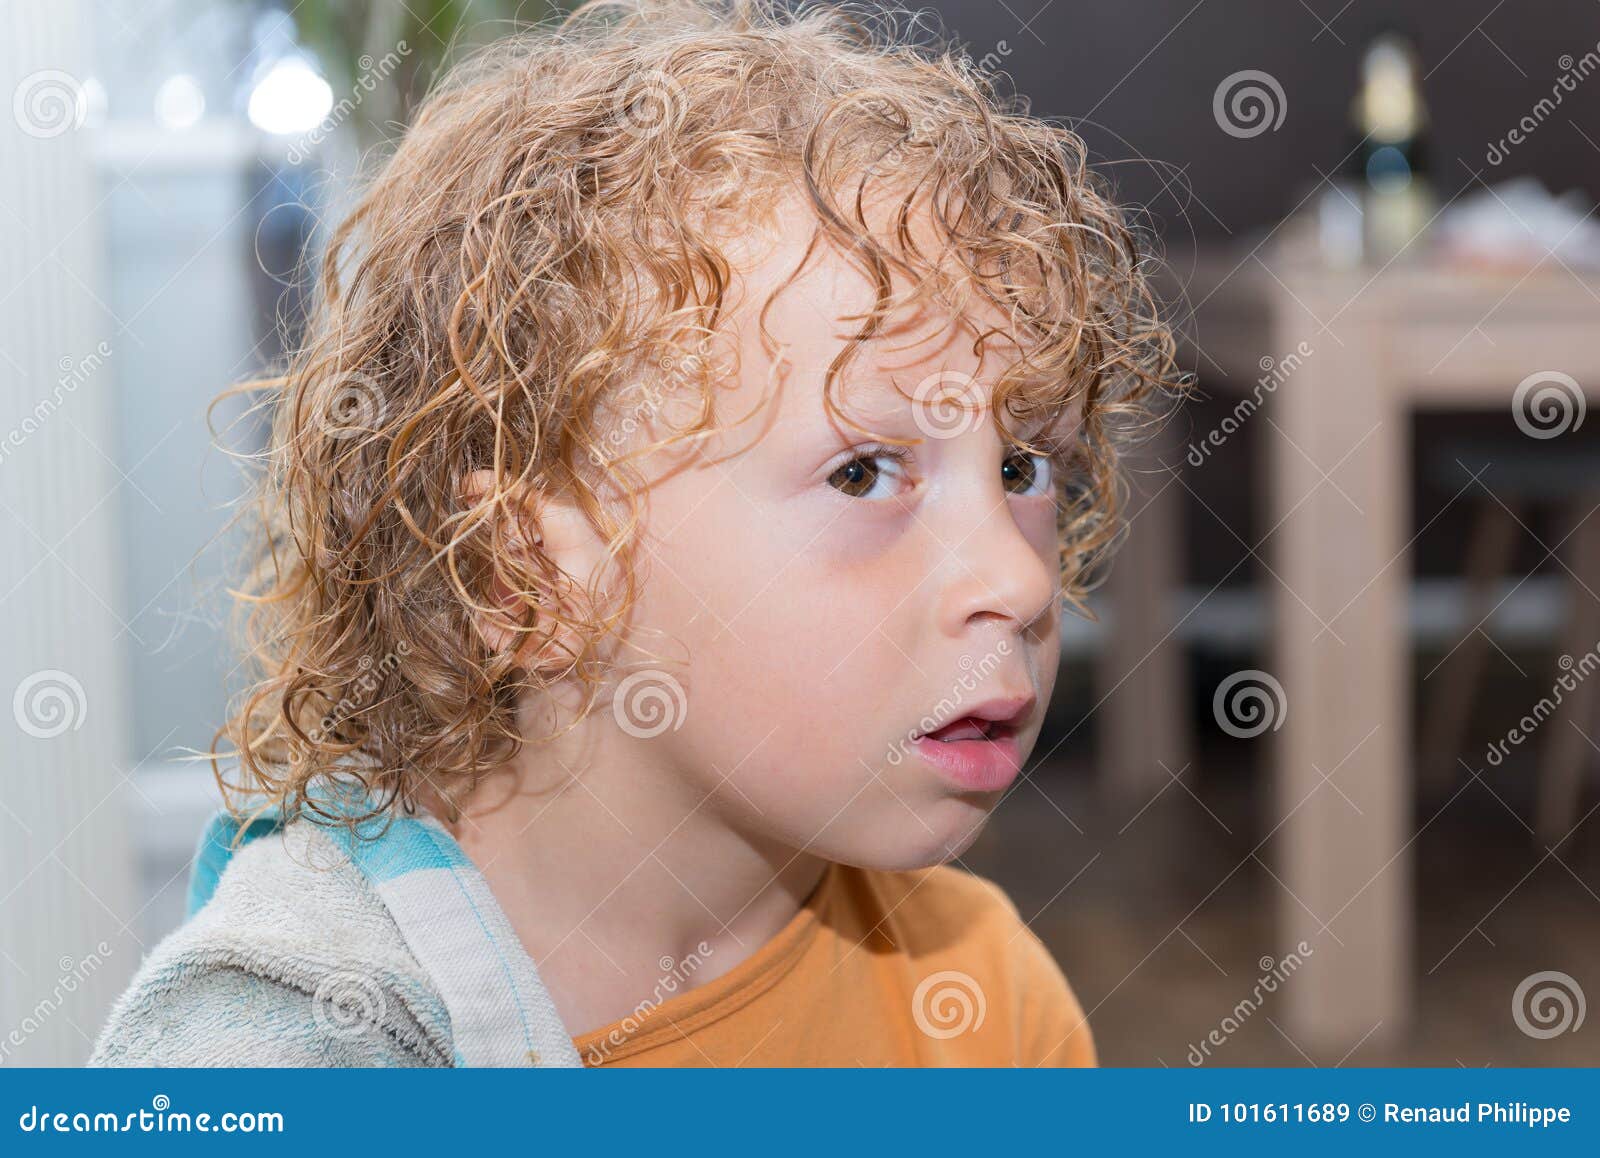 Portrait Of Little Boy With Blond And Curly Hair Stock Image